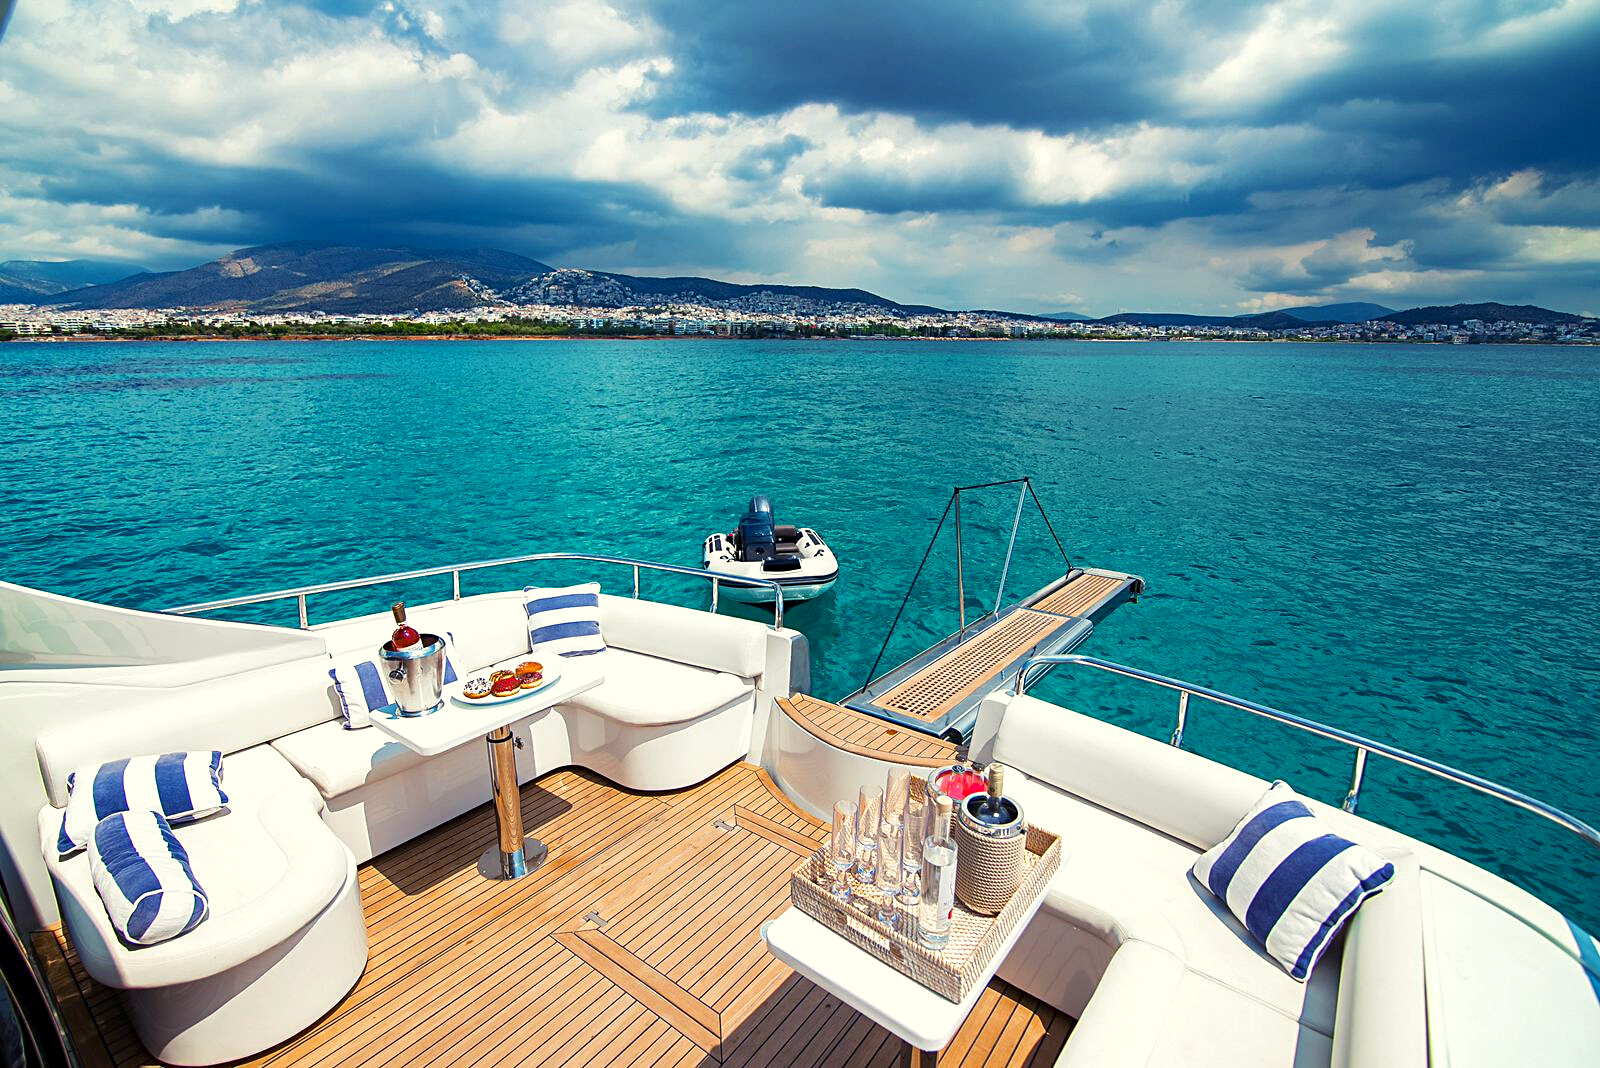 View from a deck of a yacht near Mykonos